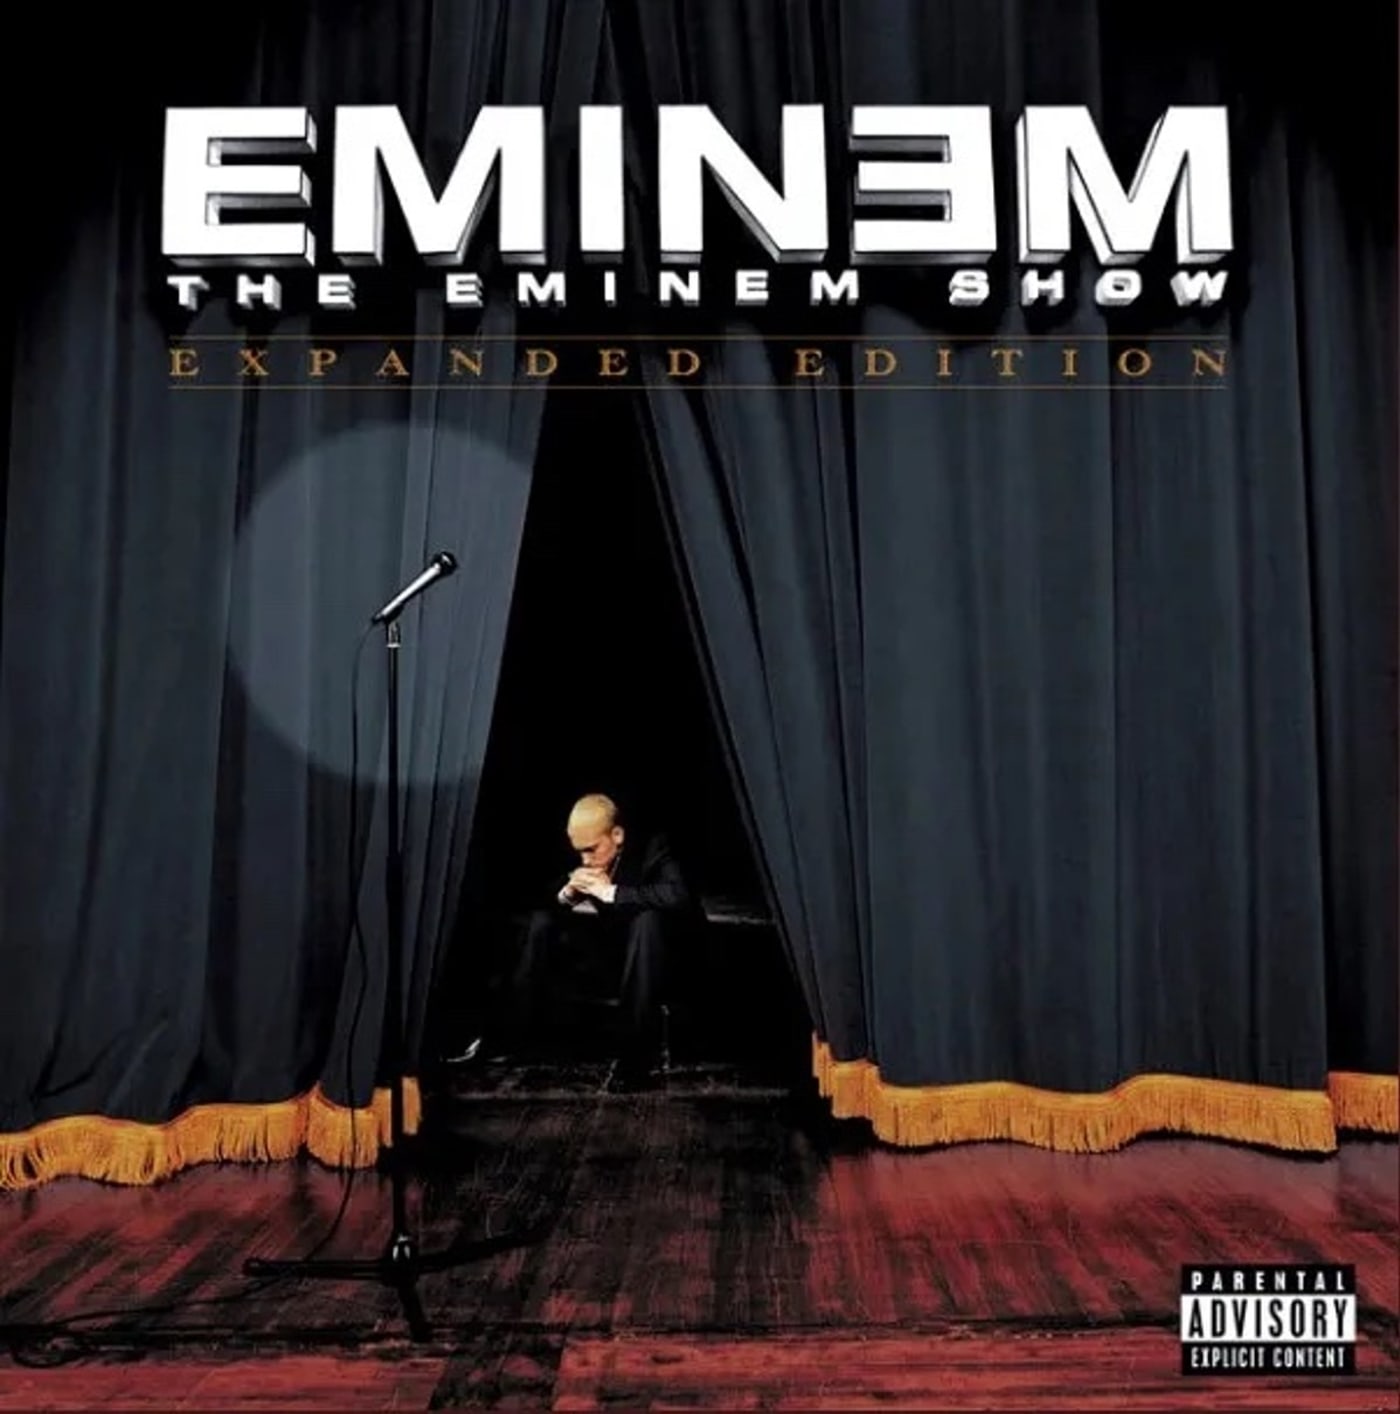 The cover art for the expanded edition of the Eminem Show